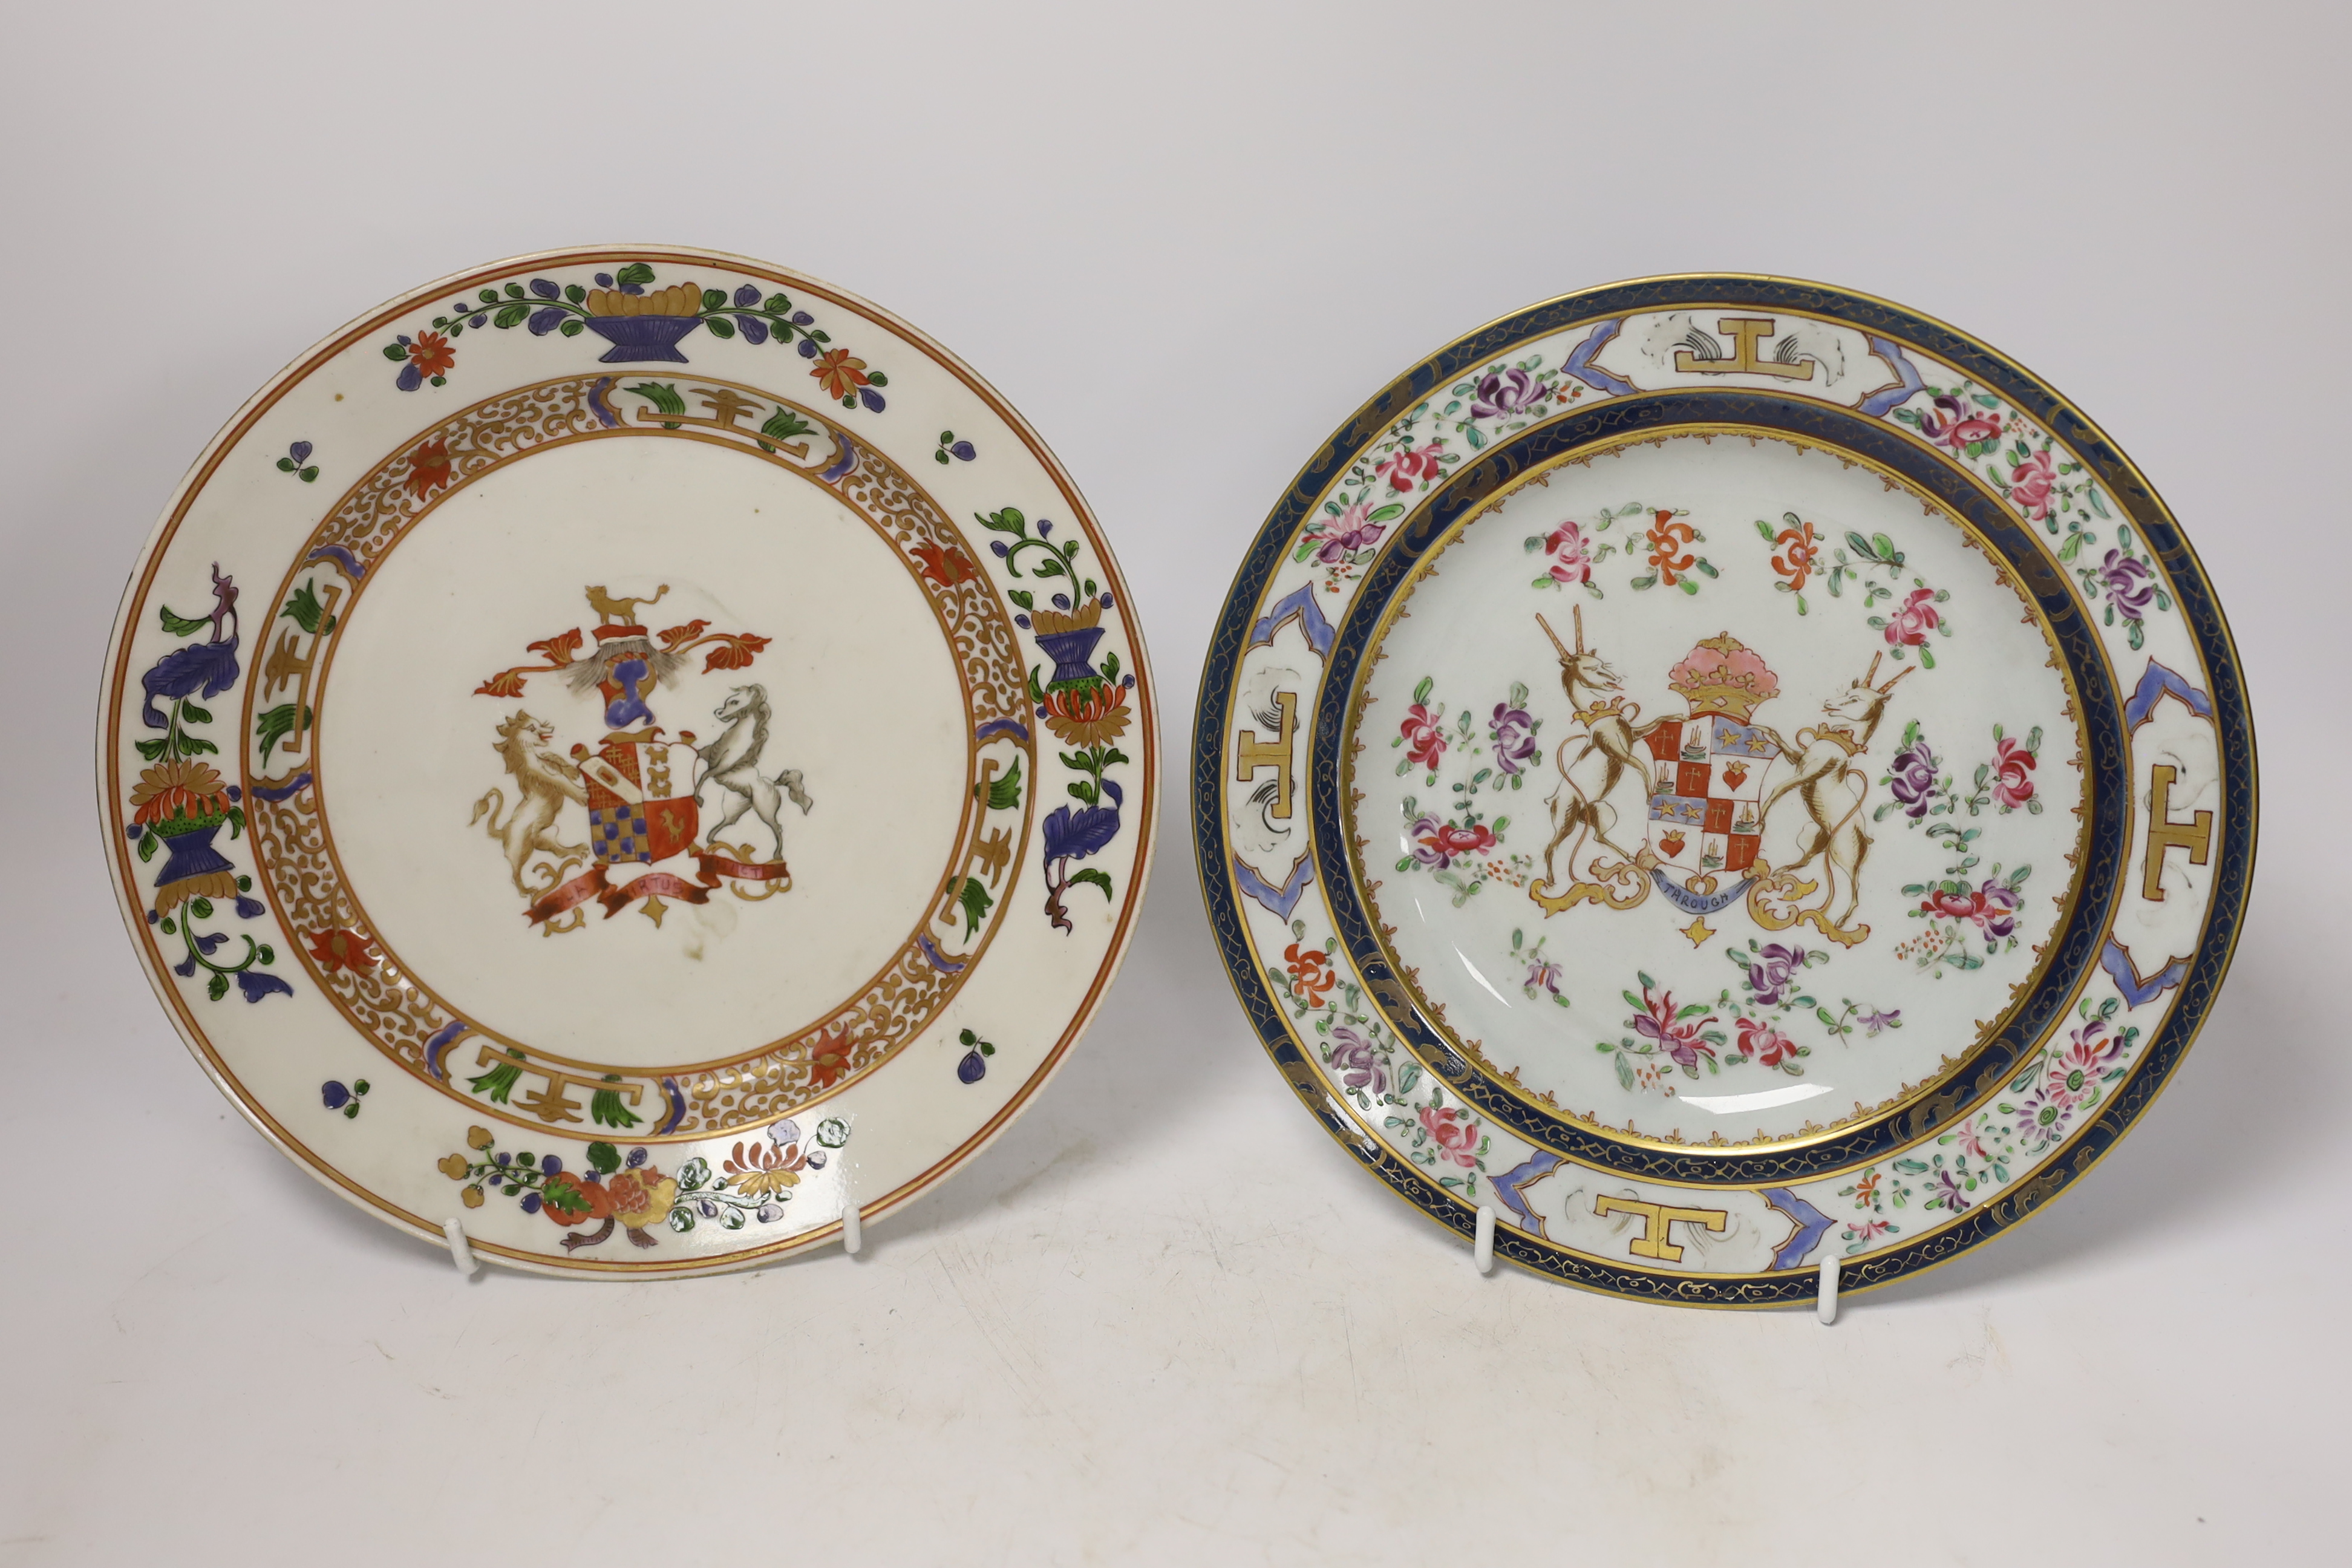 Two Samson of Paris famille rose style dishes, painted with European armorials, largest 24cm diameter (2). Condition - good, some wear to decoration